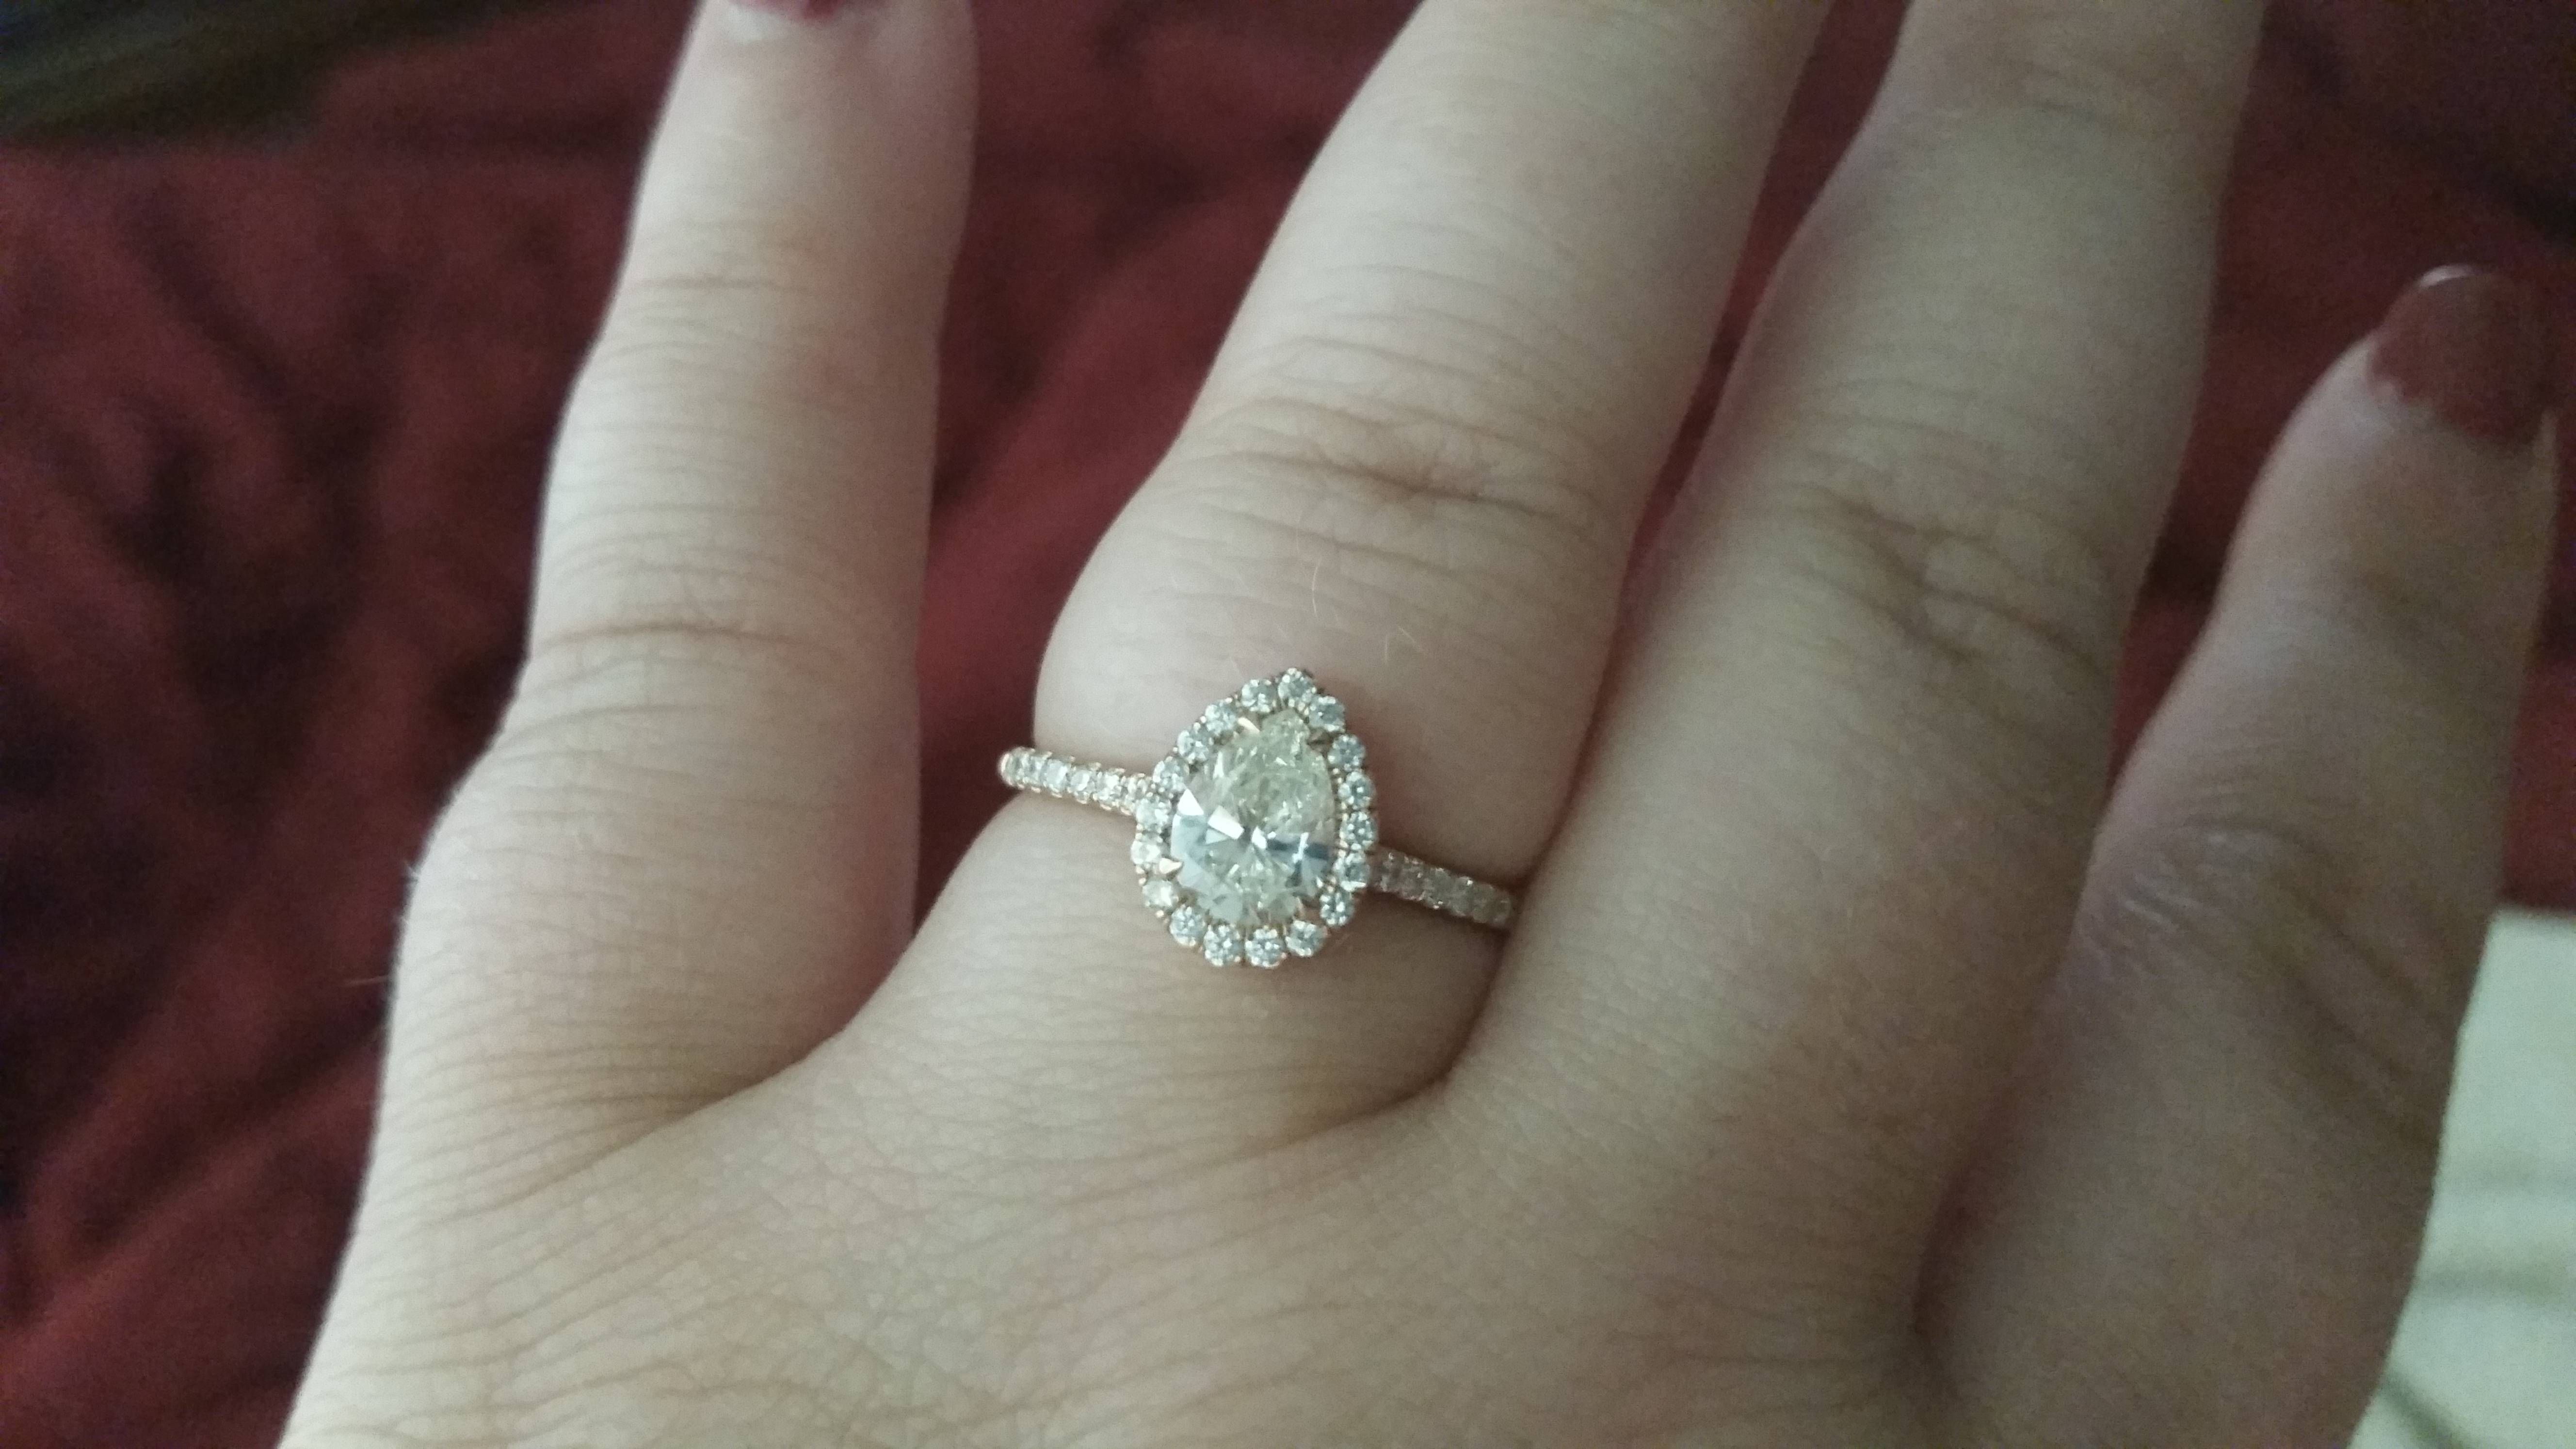 What Wedding Band For With A Pear Shaped Ring? – Weddingbee Inside Pear Shaped Engagement Rings And Wedding Band (View 7 of 15)